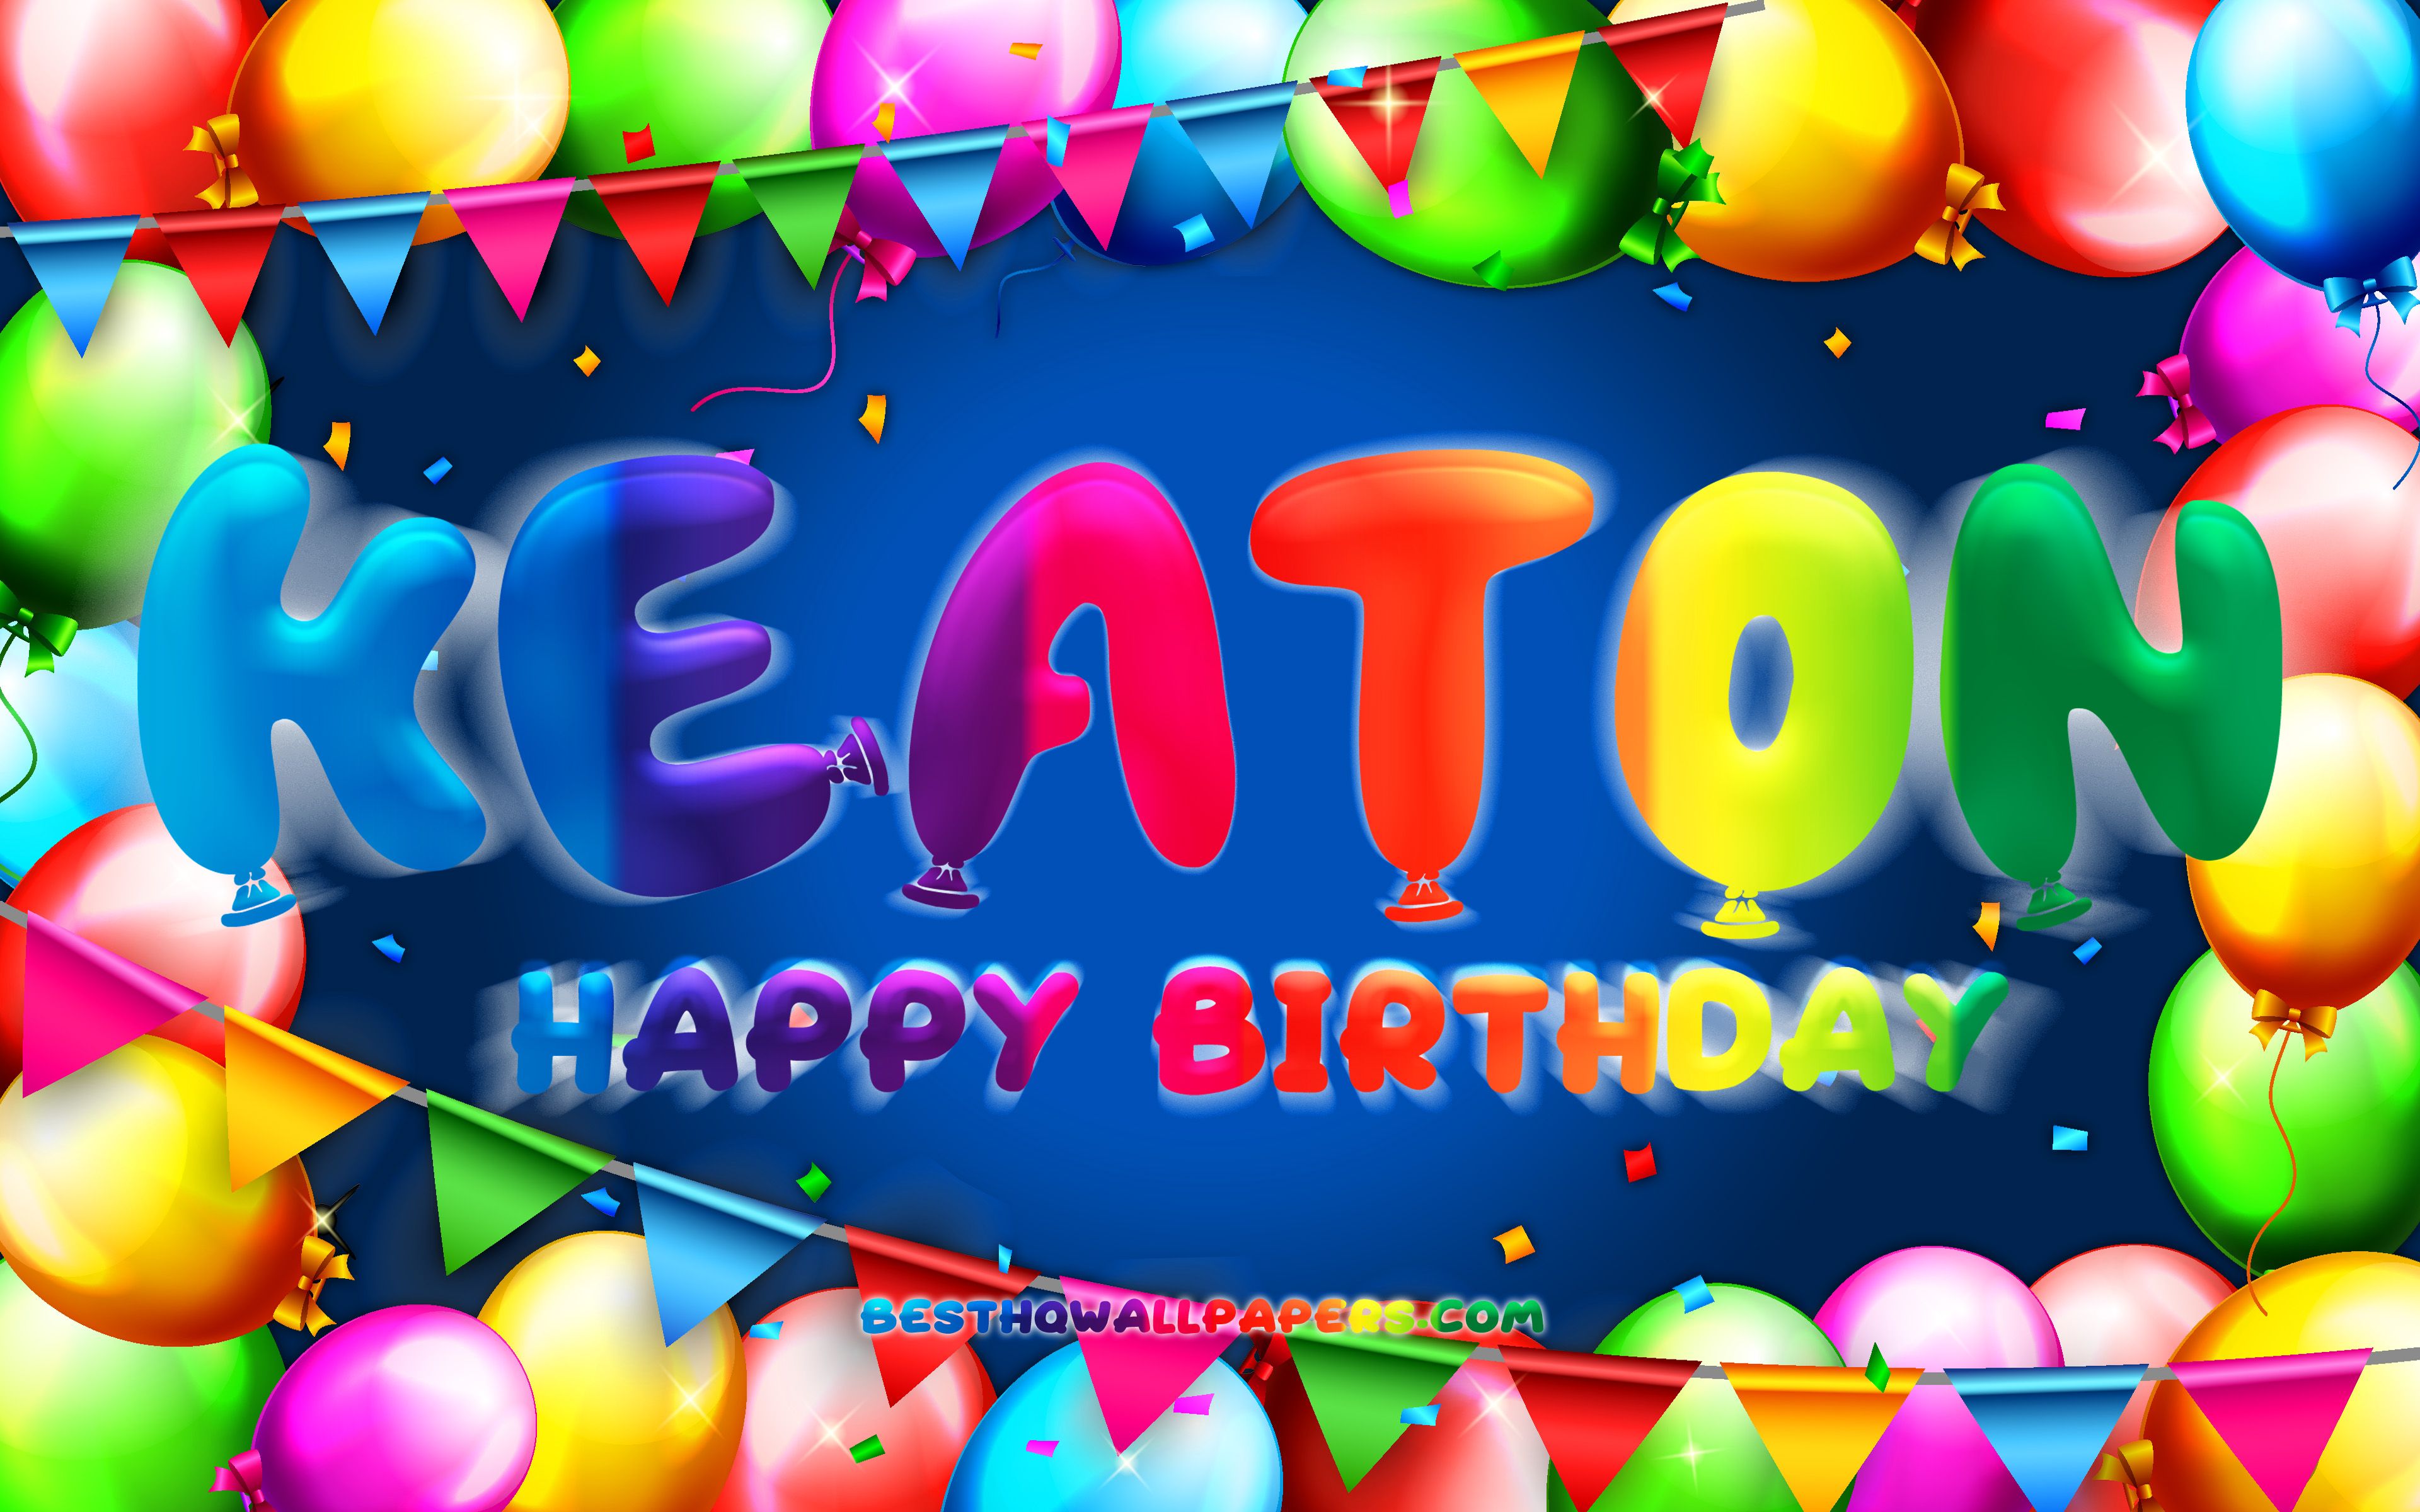 Download wallpaper Happy Birthday Keaton, 4k, colorful balloon frame, Keaton name, blue background, Keaton Happy Birthday, Keaton Birthday, popular american male names, Birthday concept, Keaton for desktop with resolution 3840x2400. High Quality